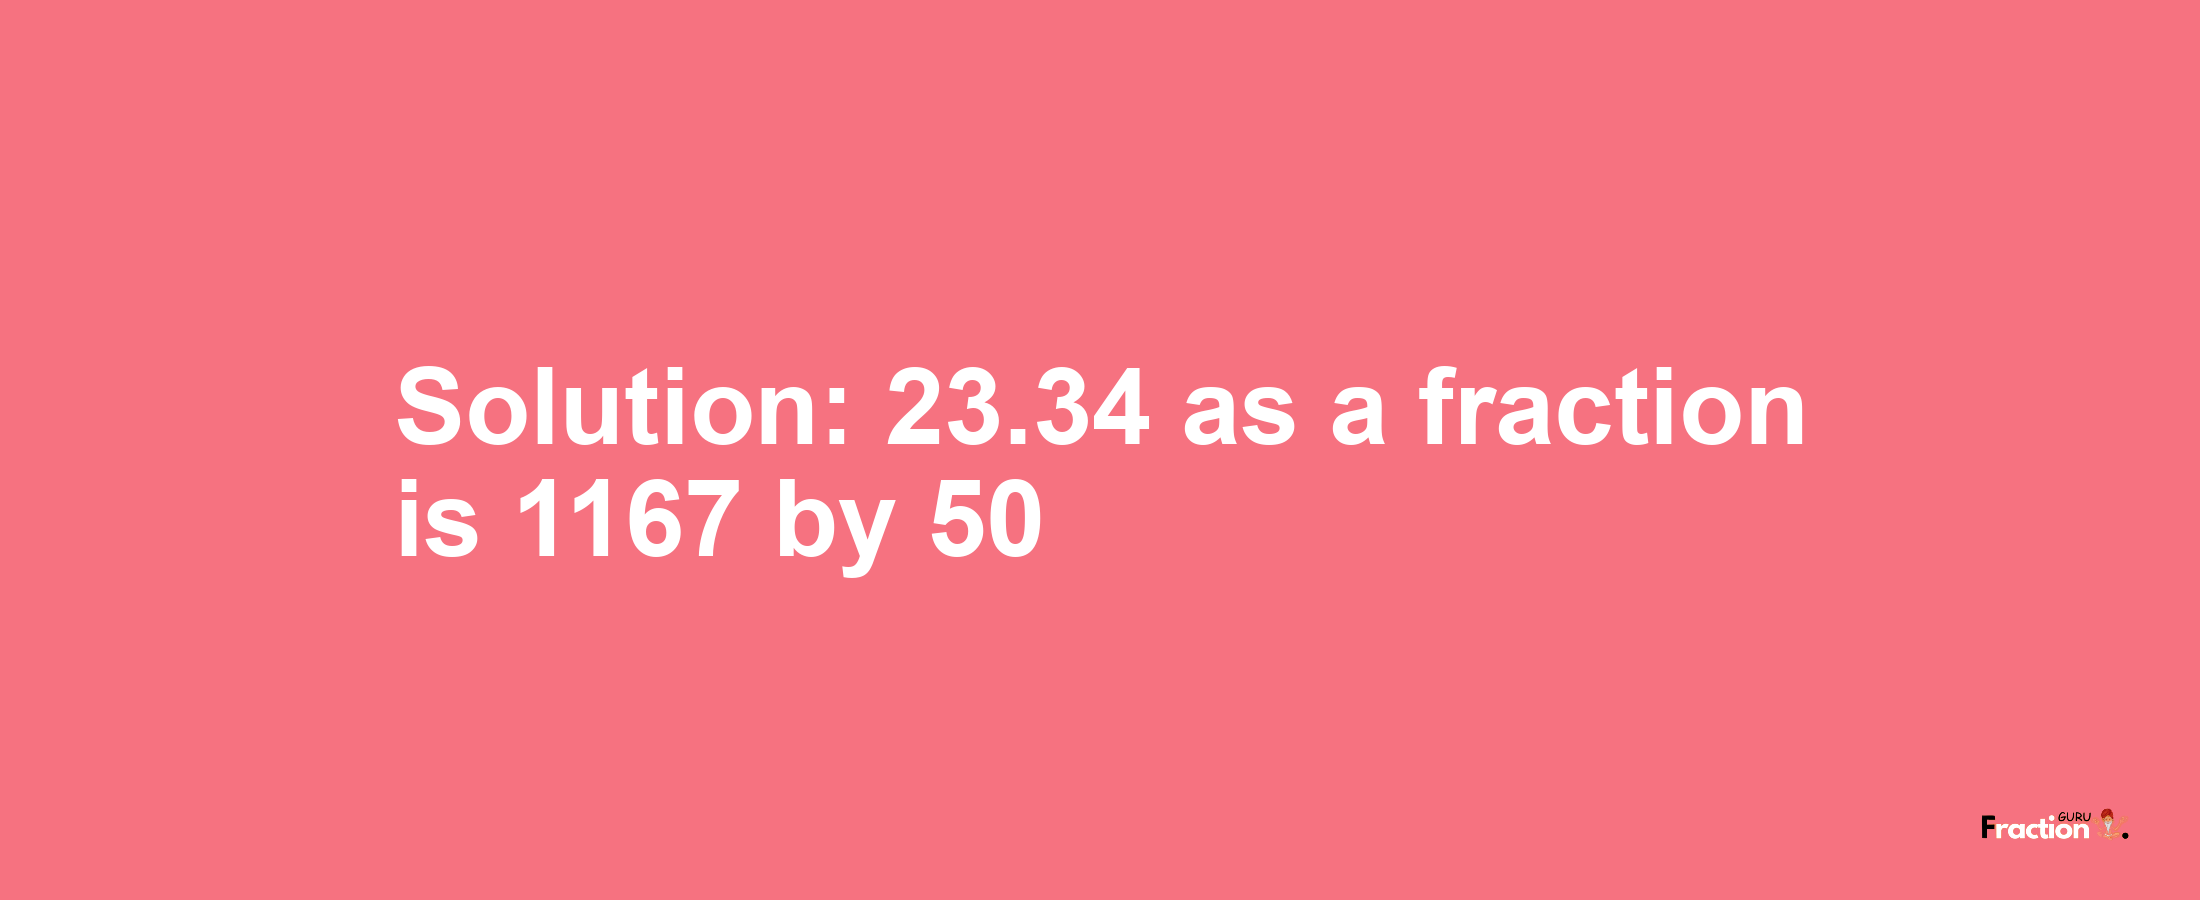 Solution:23.34 as a fraction is 1167/50